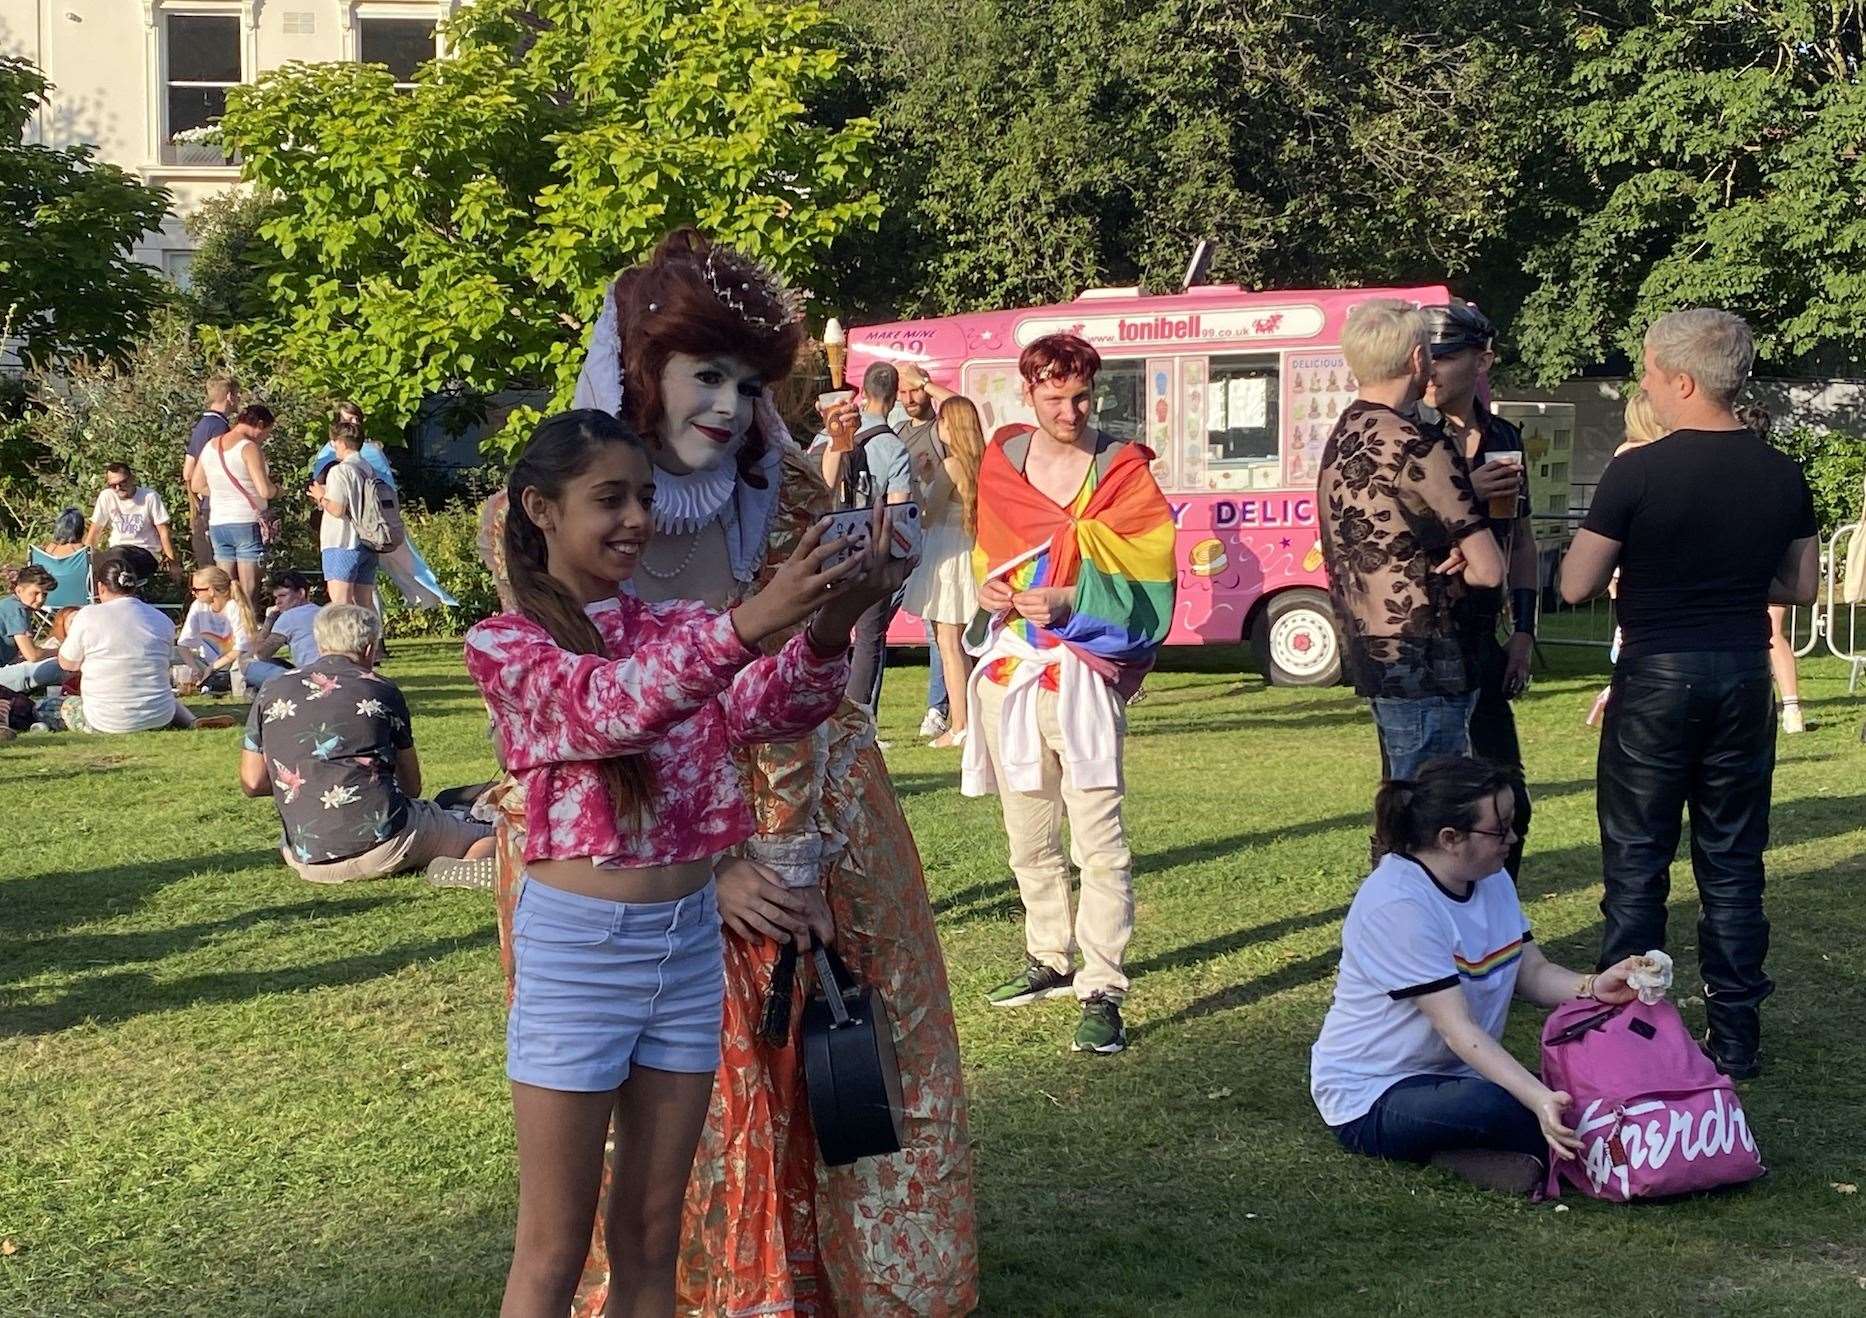 Young fans posed for selfies with drag queens